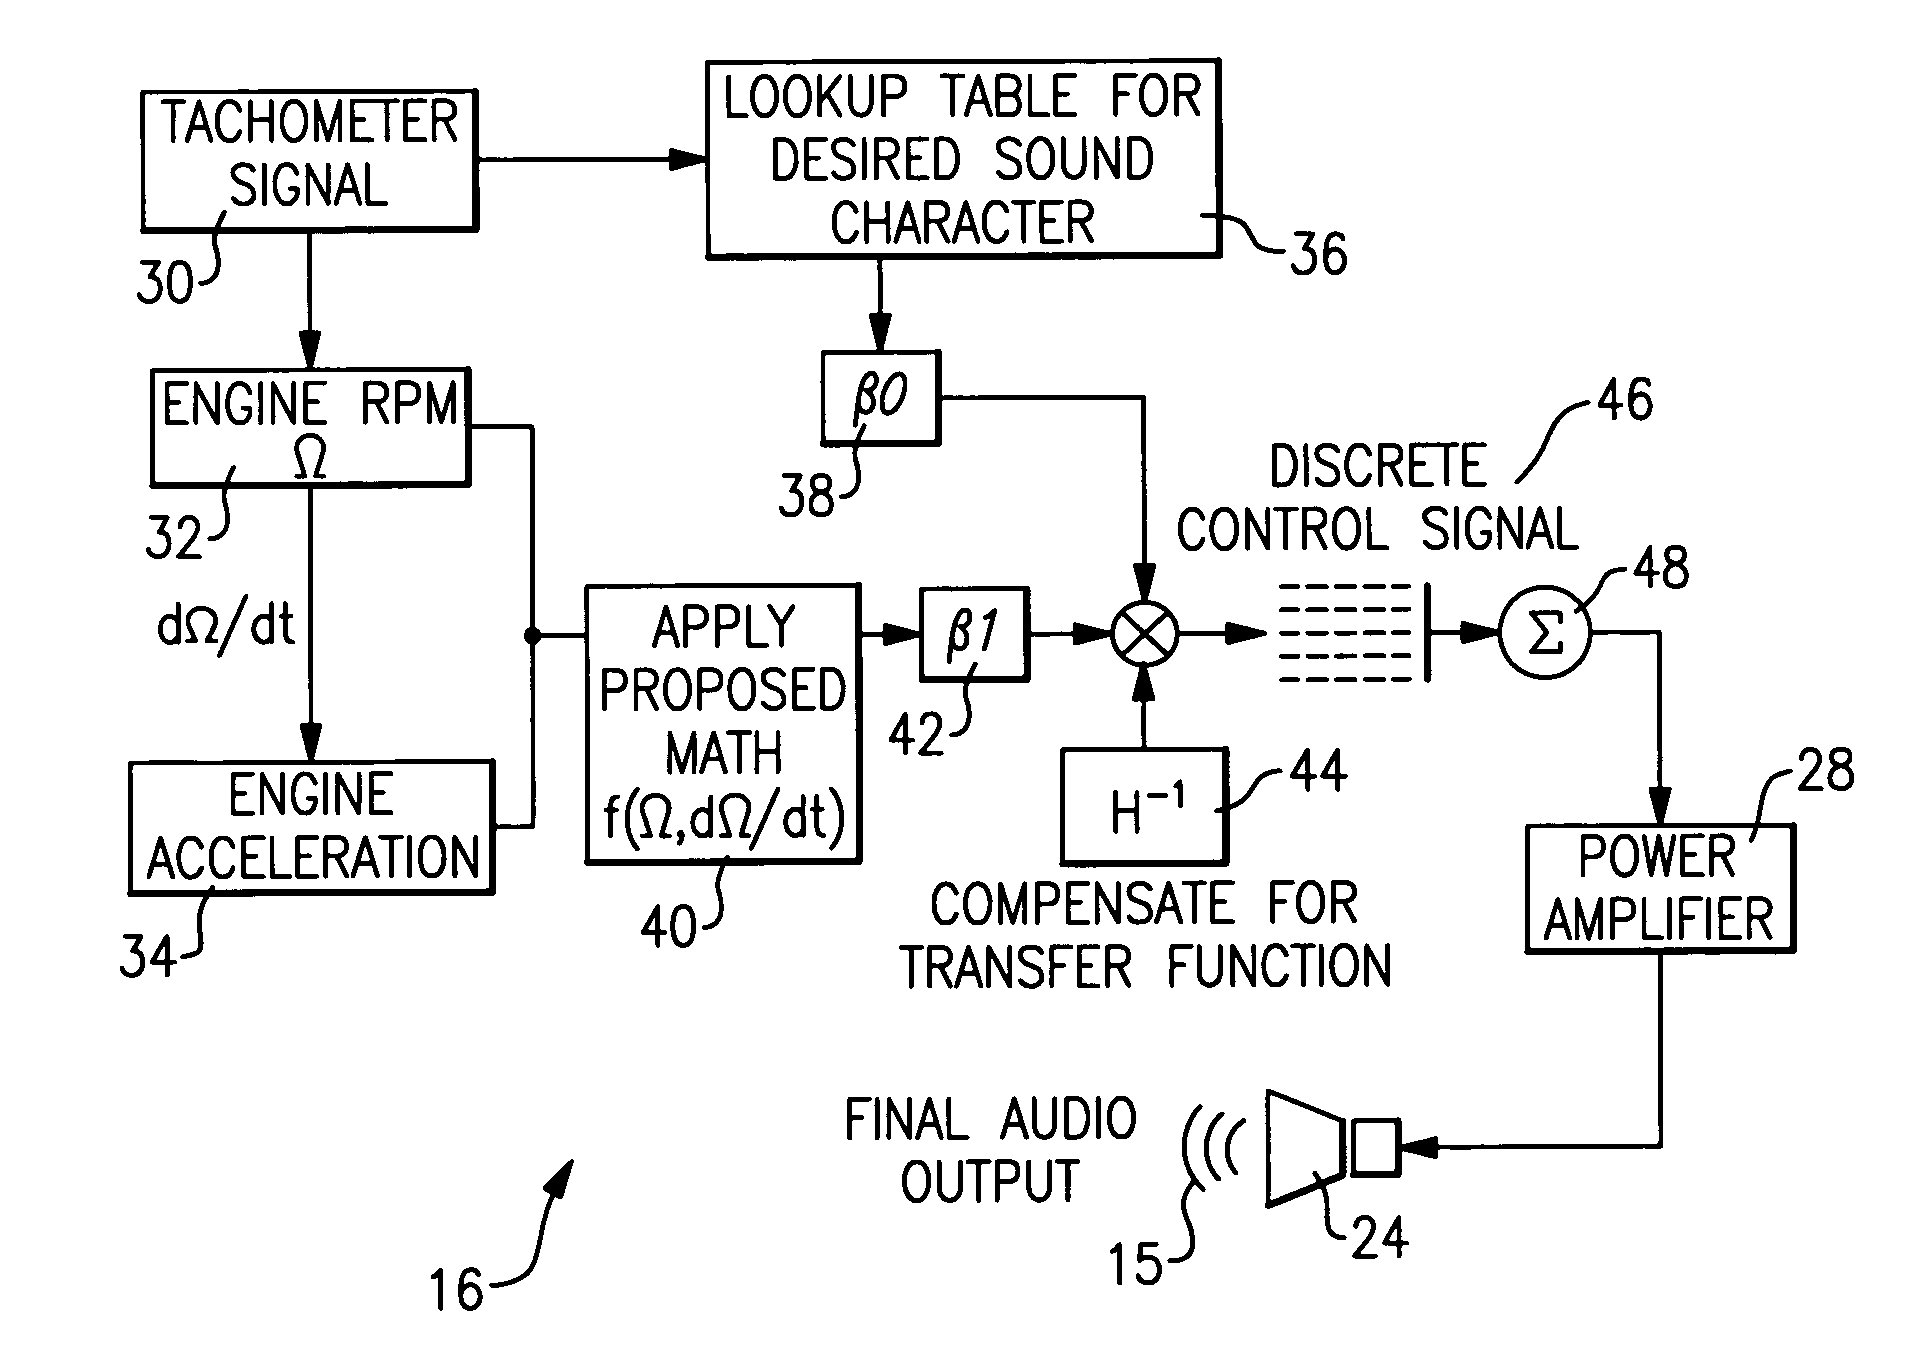 Robust system for sound enhancement from a single engine sensor